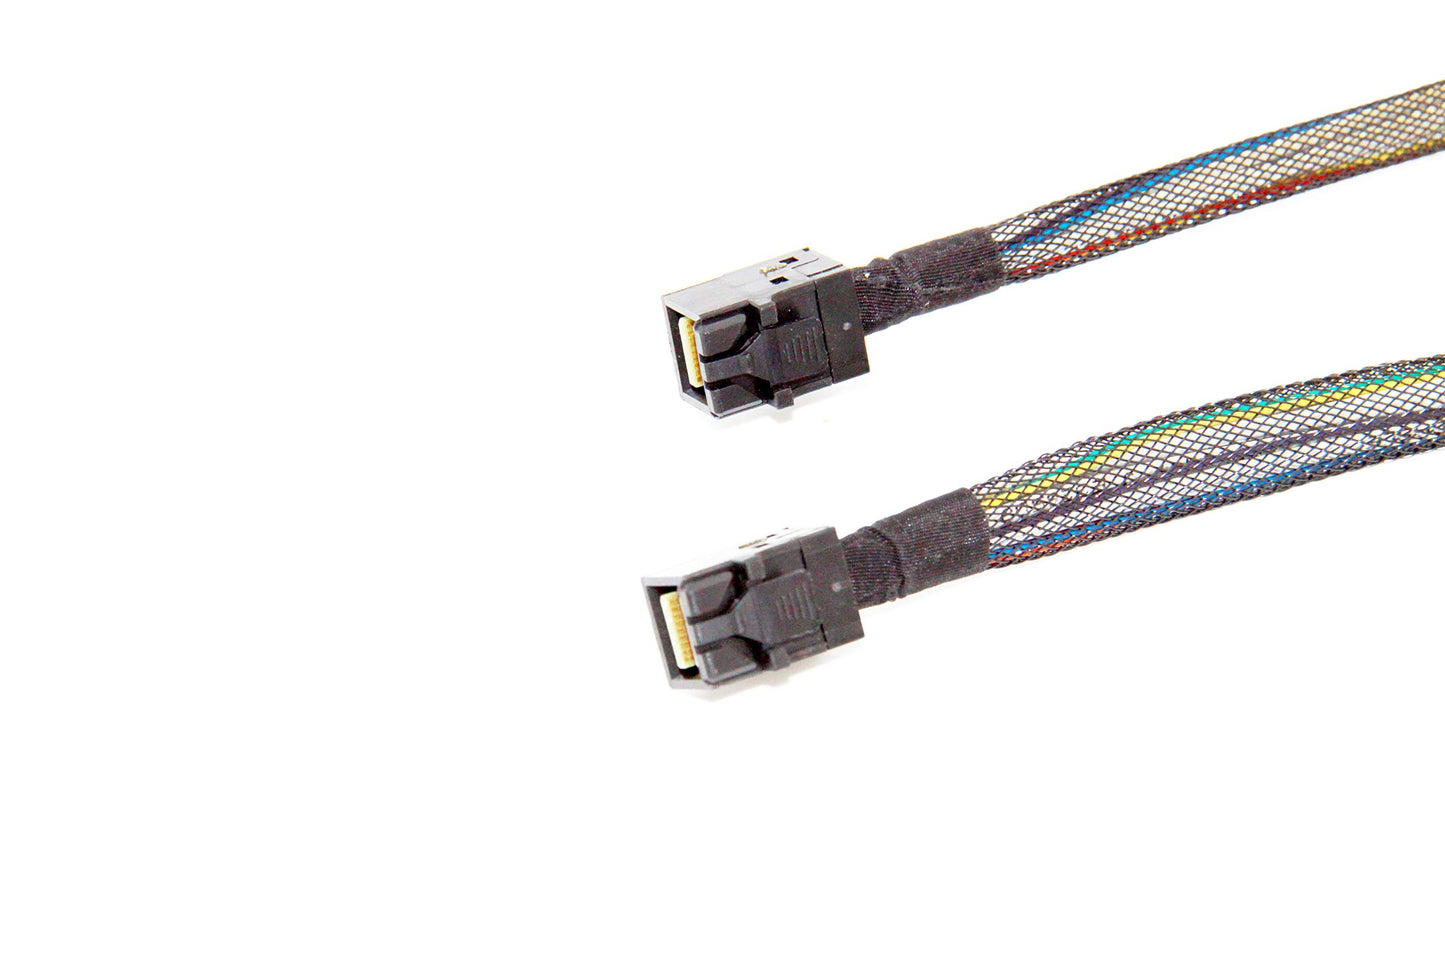 DiLiVing MiniSAS HD to MiniSAS HD,SFF-8643 to SFF-8643 Cable 75cm